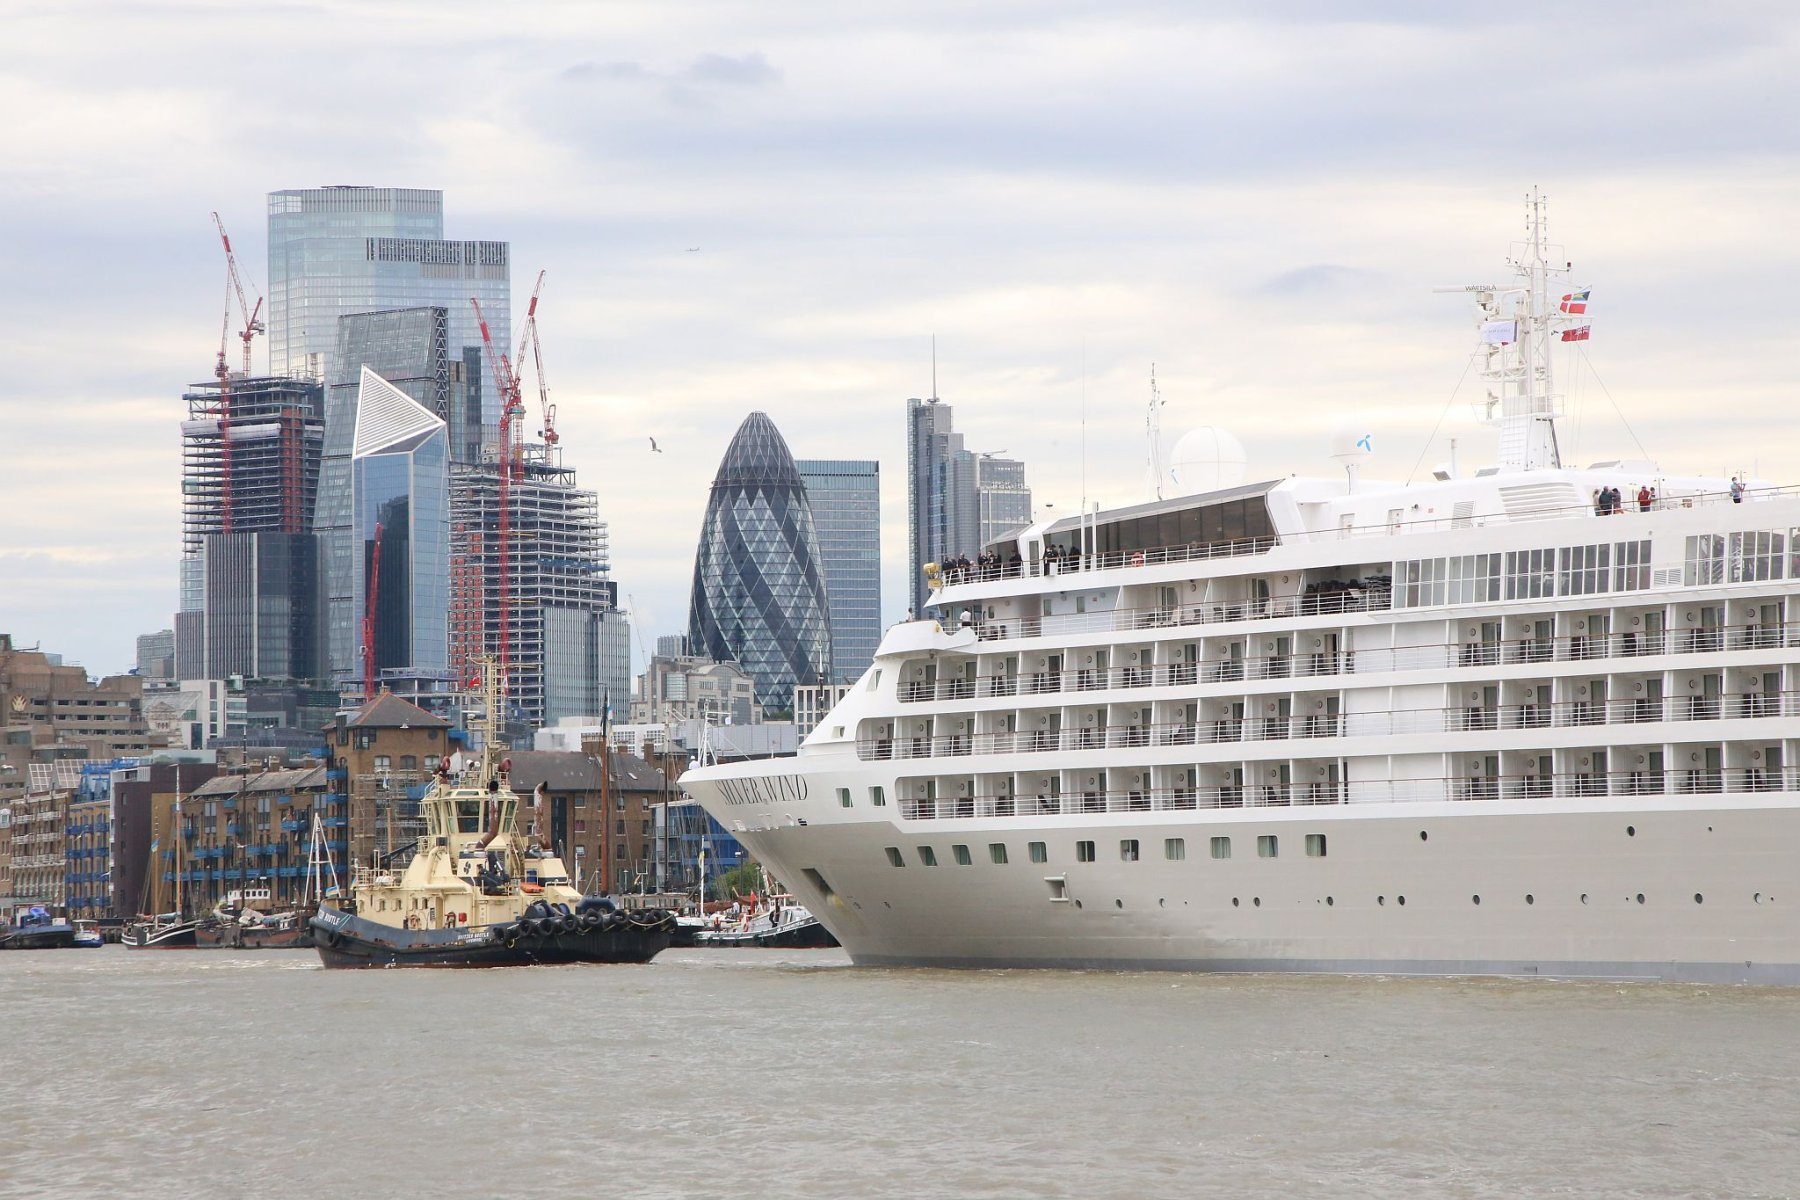 Cruise ship Silver Wind being taken backwards down the River Thames, before being turned at Wapping, to leaving London 19-Jun-2022